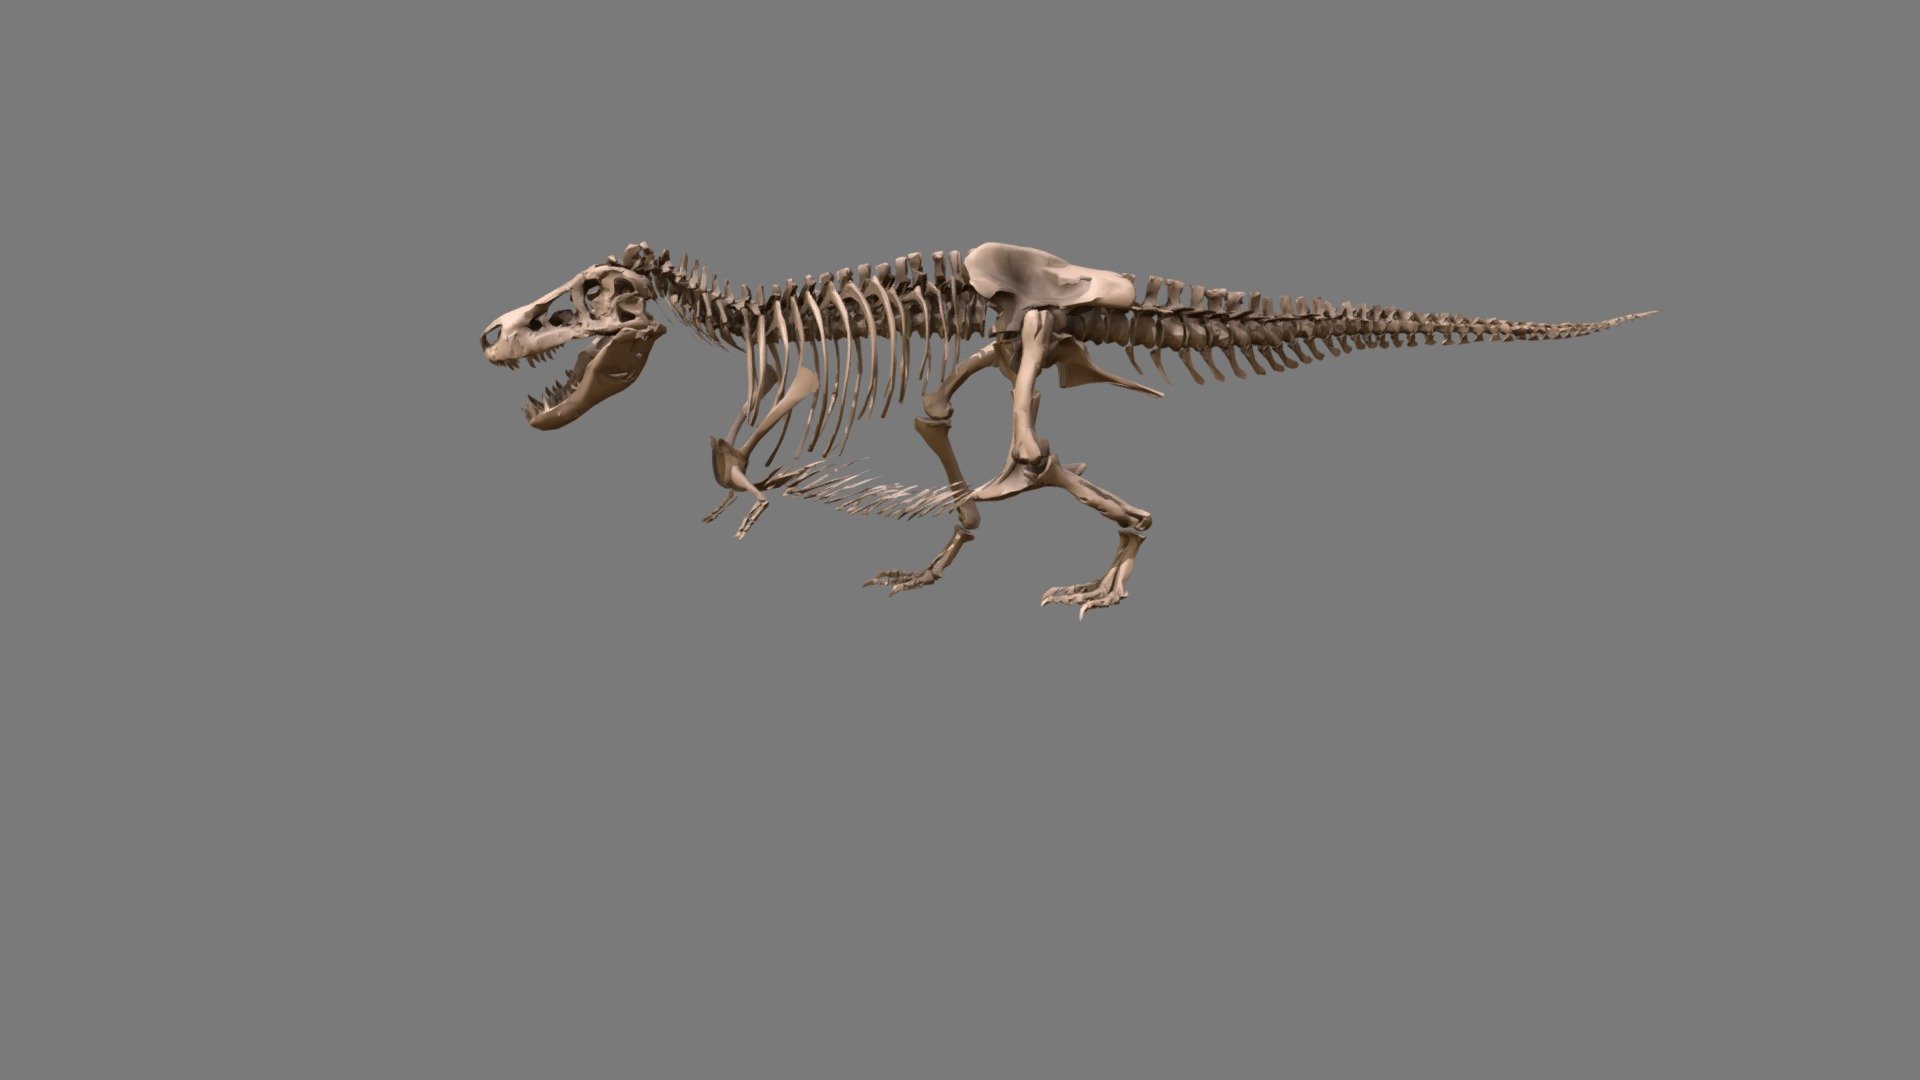 SUE is the largest and most complete Tyrannosaurus rex skeleton ever found. Find out more about what we can learn from an animal's life by looking at their fossils by interacting with the model above. Answers to the questions, further resources, and a quick model tutorial can be found at https://www.fieldmuseum.org/educators/learning-resources/3d-model-tyrannosaurus-rex.

https://db.fieldmuseum.org/df4e79be-0726-4196-b745-d0717df2bd1c
PR2081 Field Museum of Natural History - SUE the T. rex - Virtual Tour - 3D model by fieldmuseumeducation 3d model